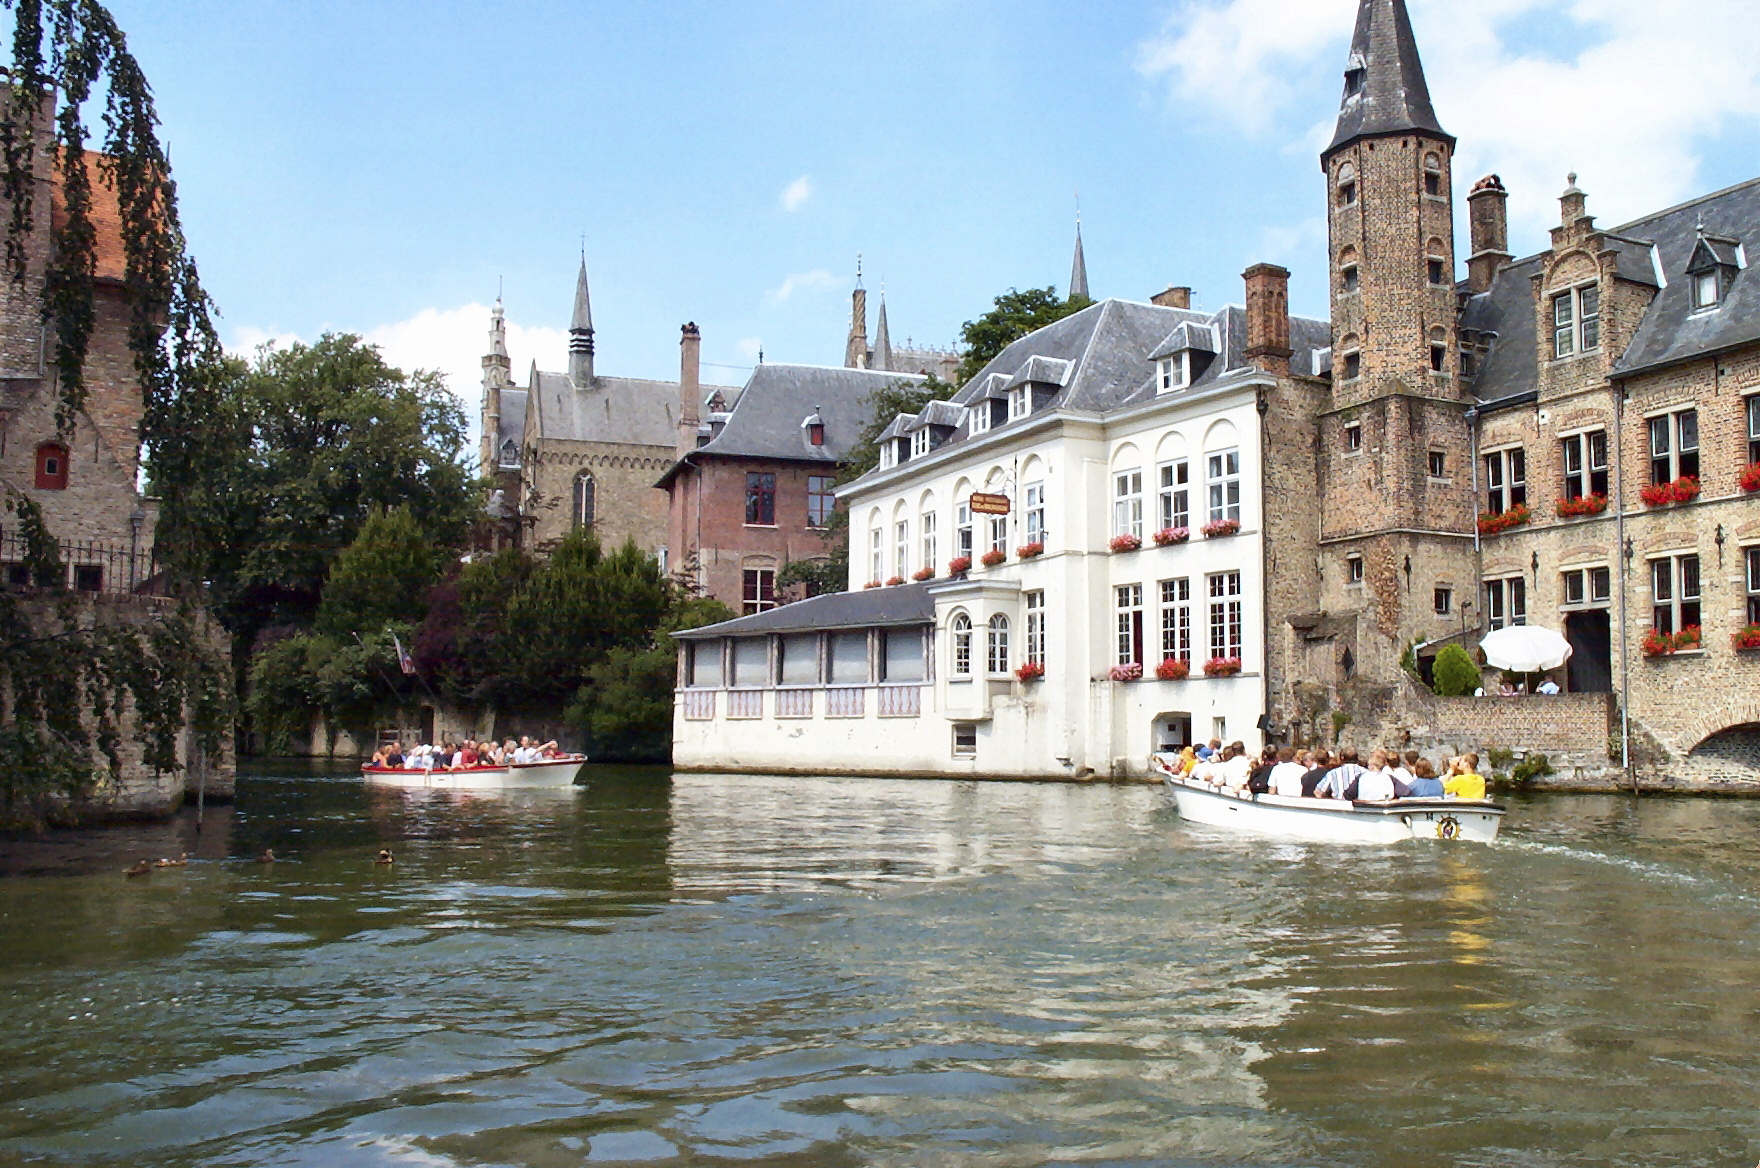 Istock_BE_Bruges_2006_009